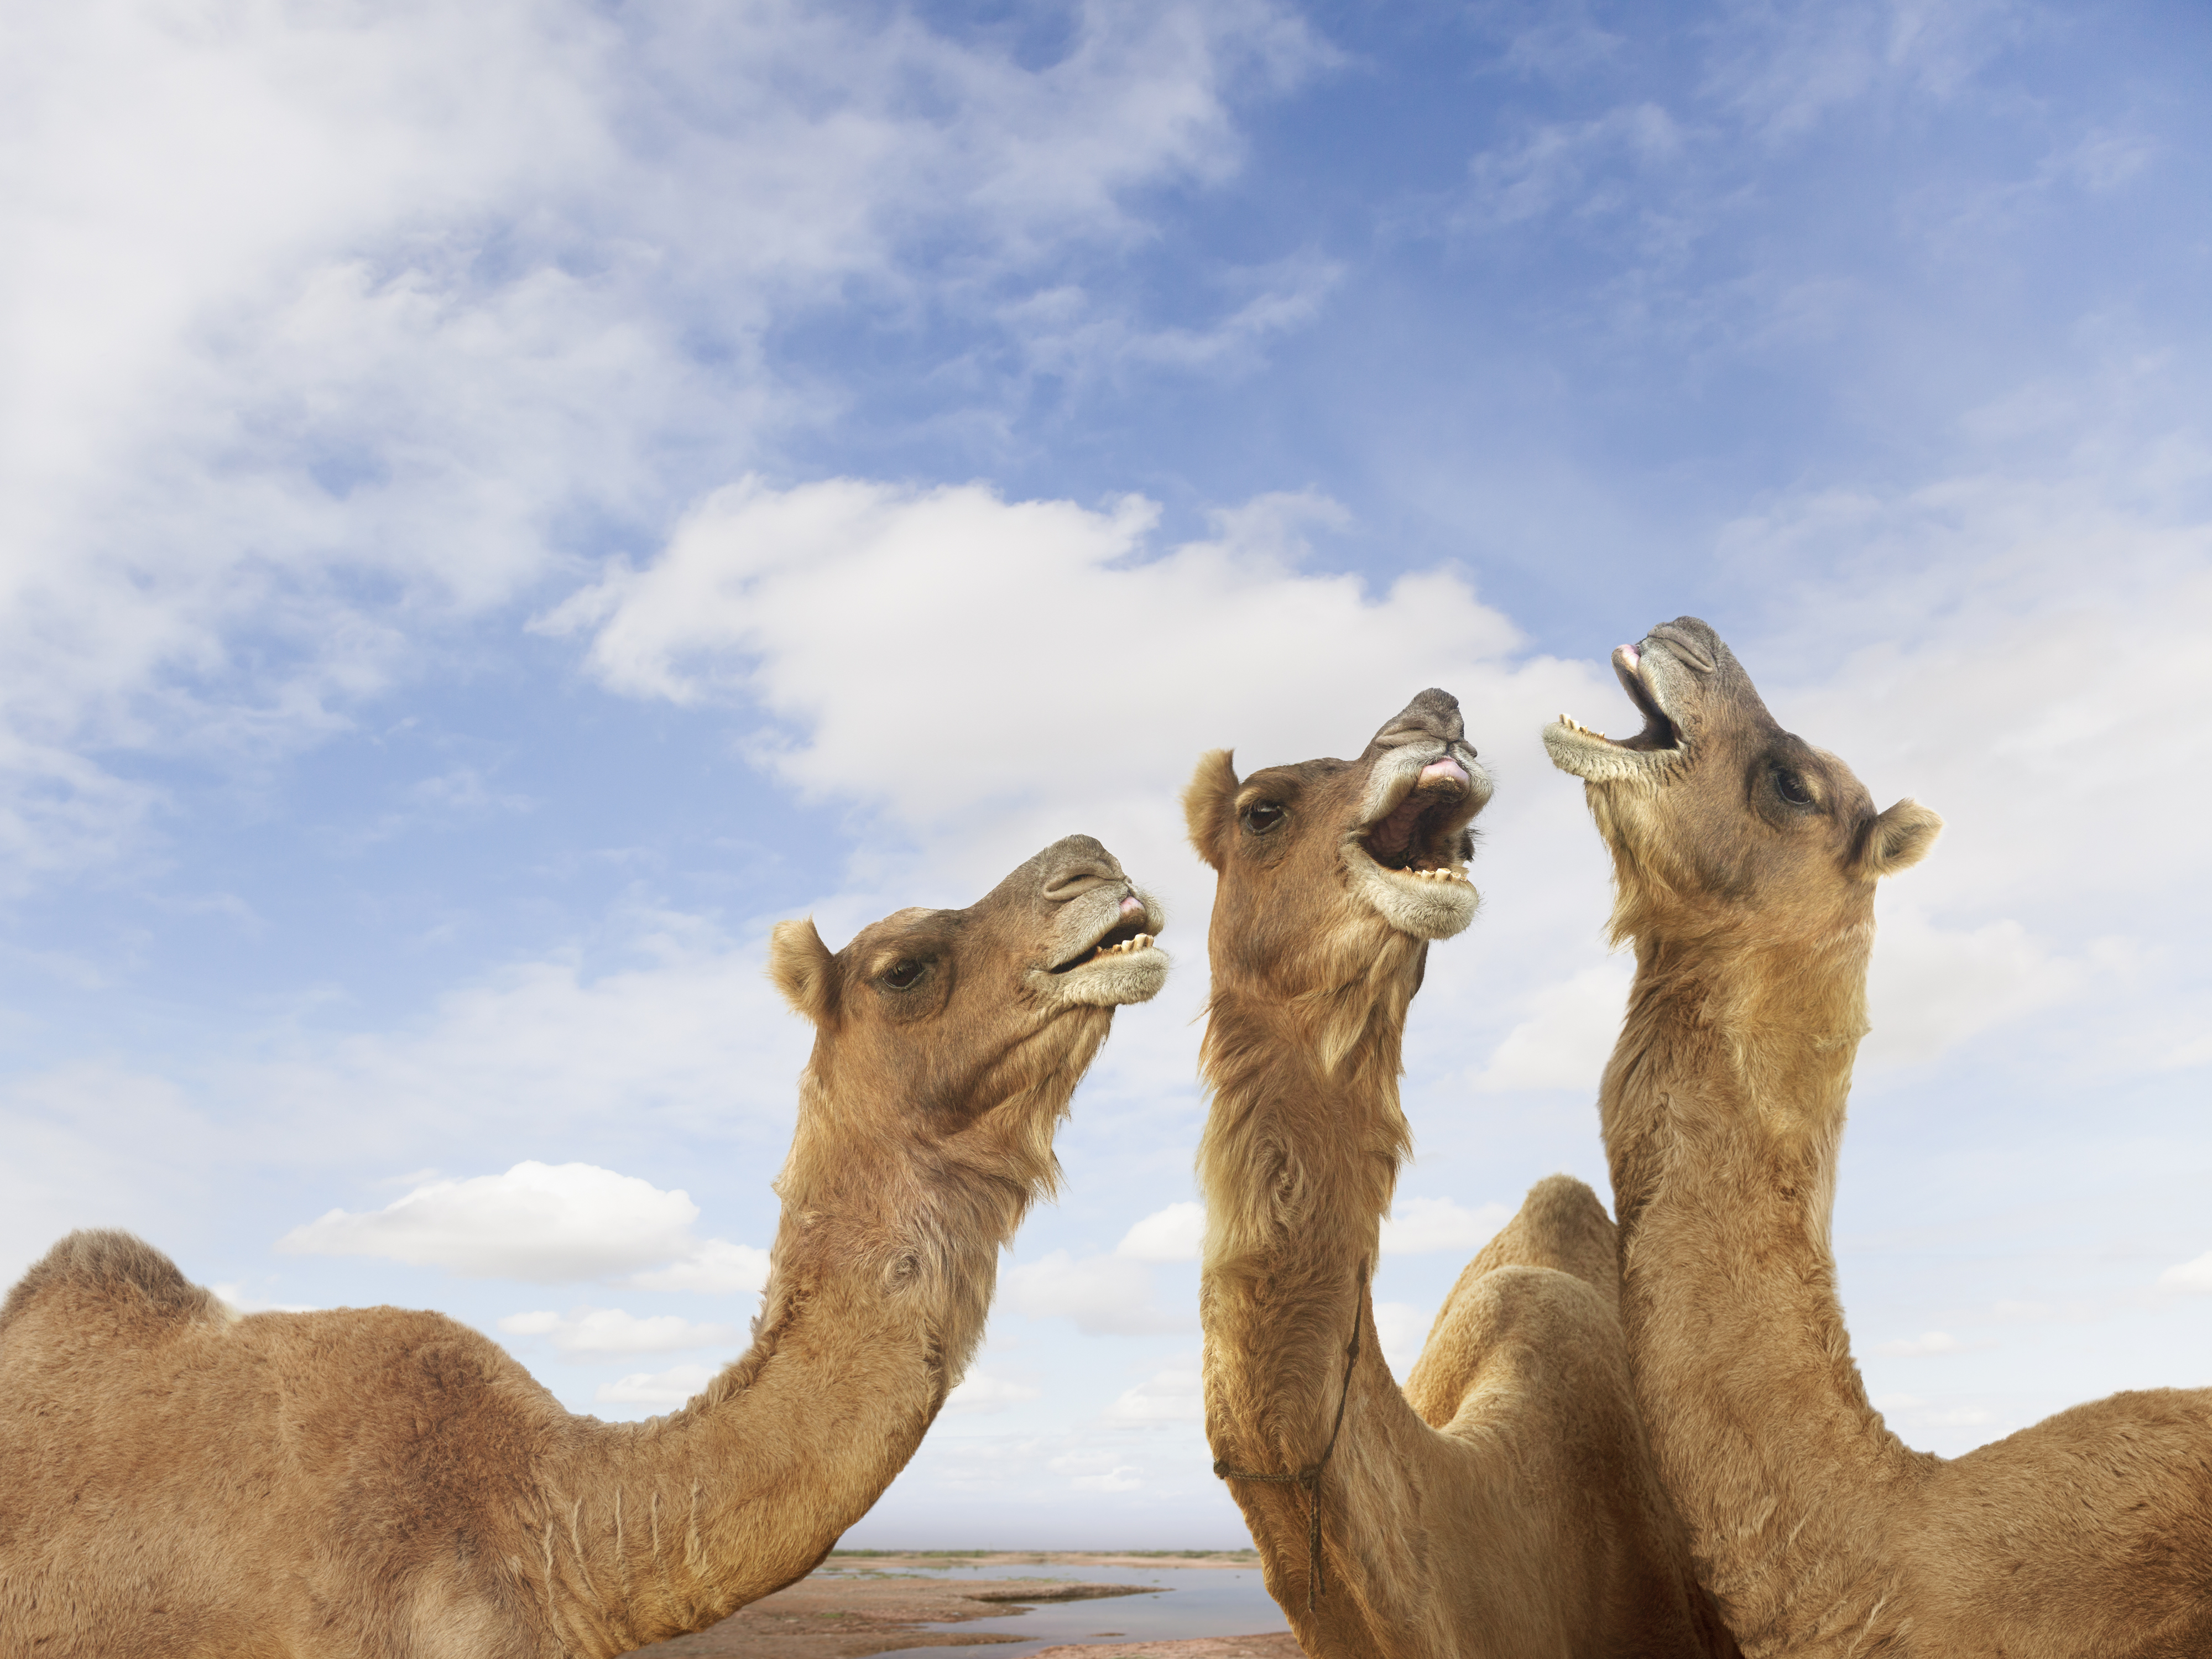 Three camels with open mouths as if vocalizing against a cloudy sky